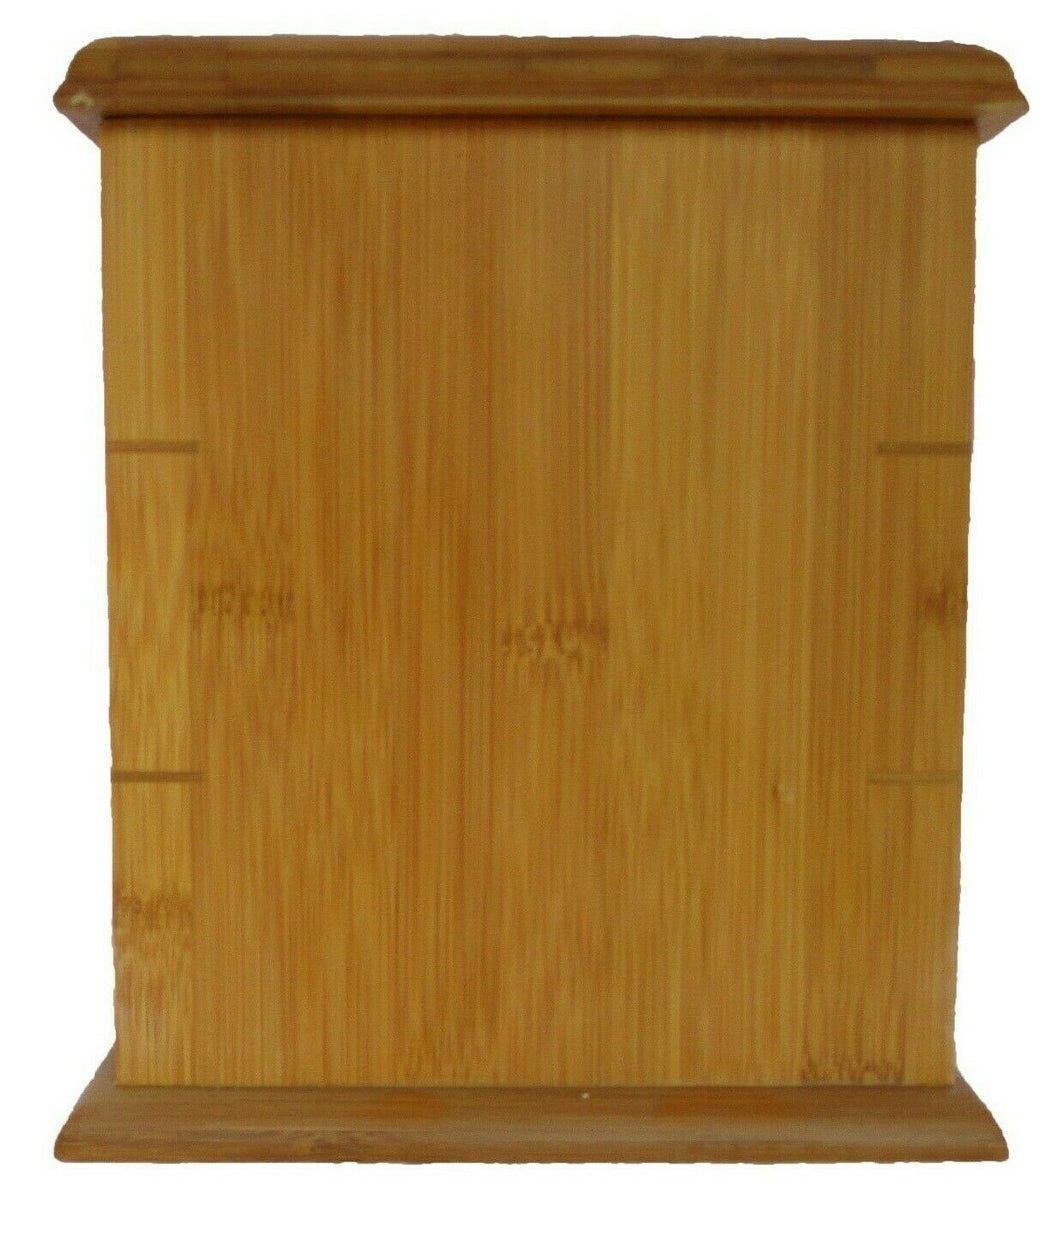 Large/Adult 230 Cubic Inches Vertical Natural Bamboo Urn for Cremation Ashes